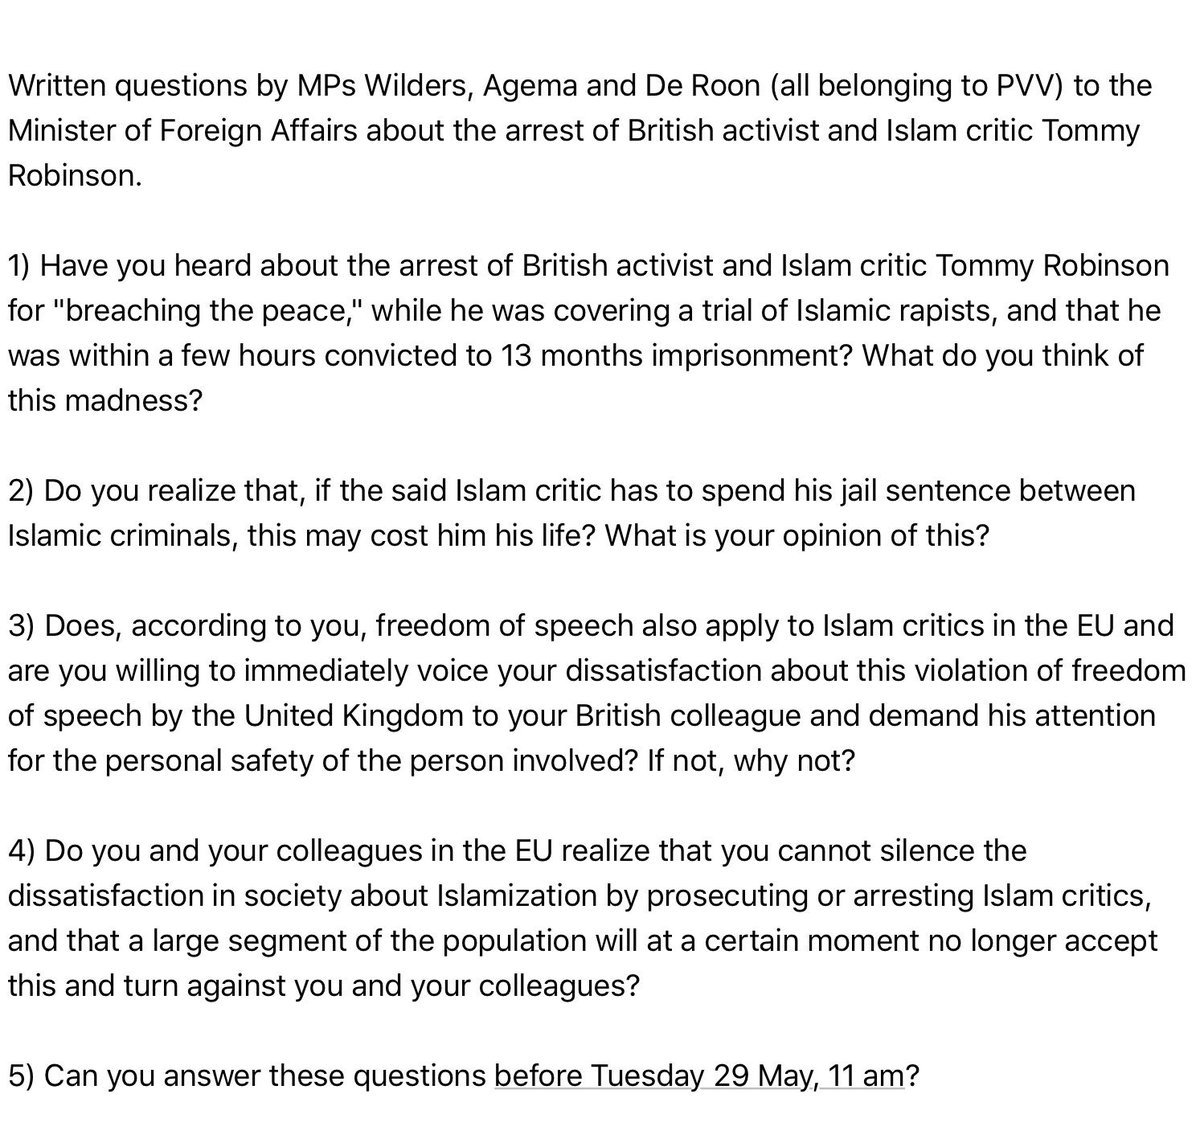 Parliamentary questions to the Dutch Minister of Foreign Affairs about the arrest and safety of Tommy Robinson.

#TommyRobinson #FreeTommy #FreeSpeech